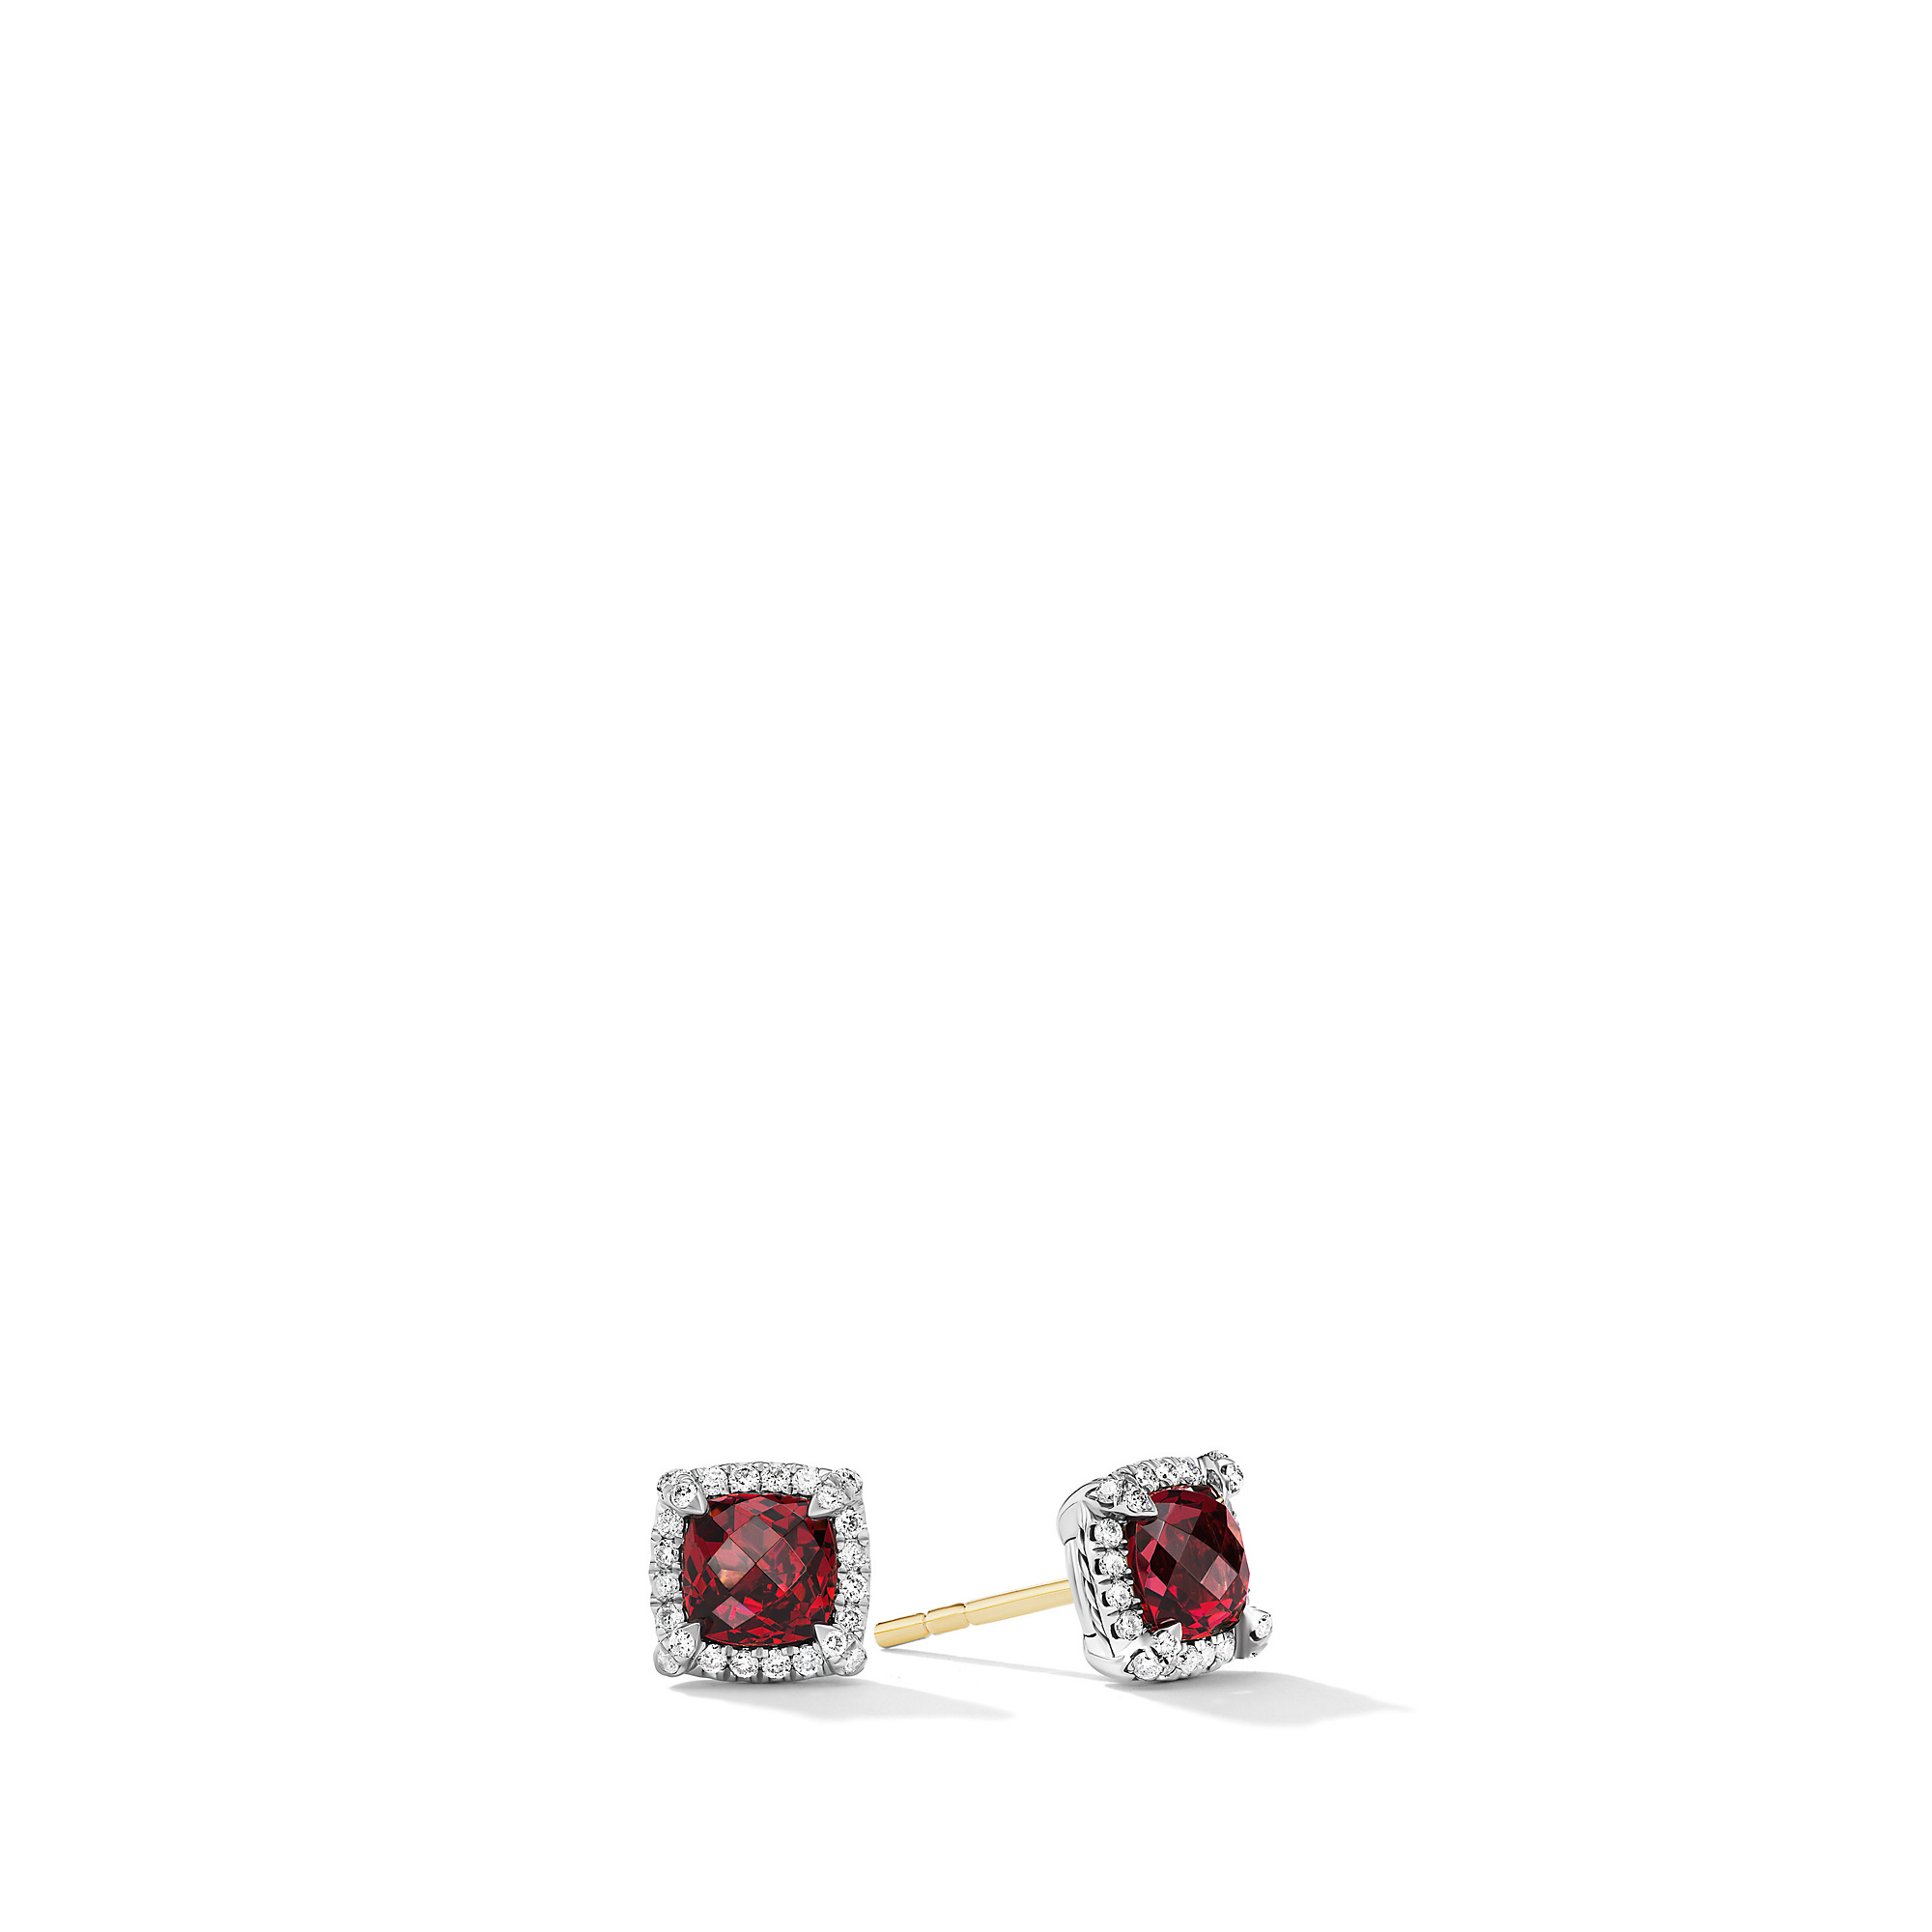 Petite Chatelaine® Pave Bezel Stud Earrings in Sterling Silver with Rhodolite Garnet and Diamonds